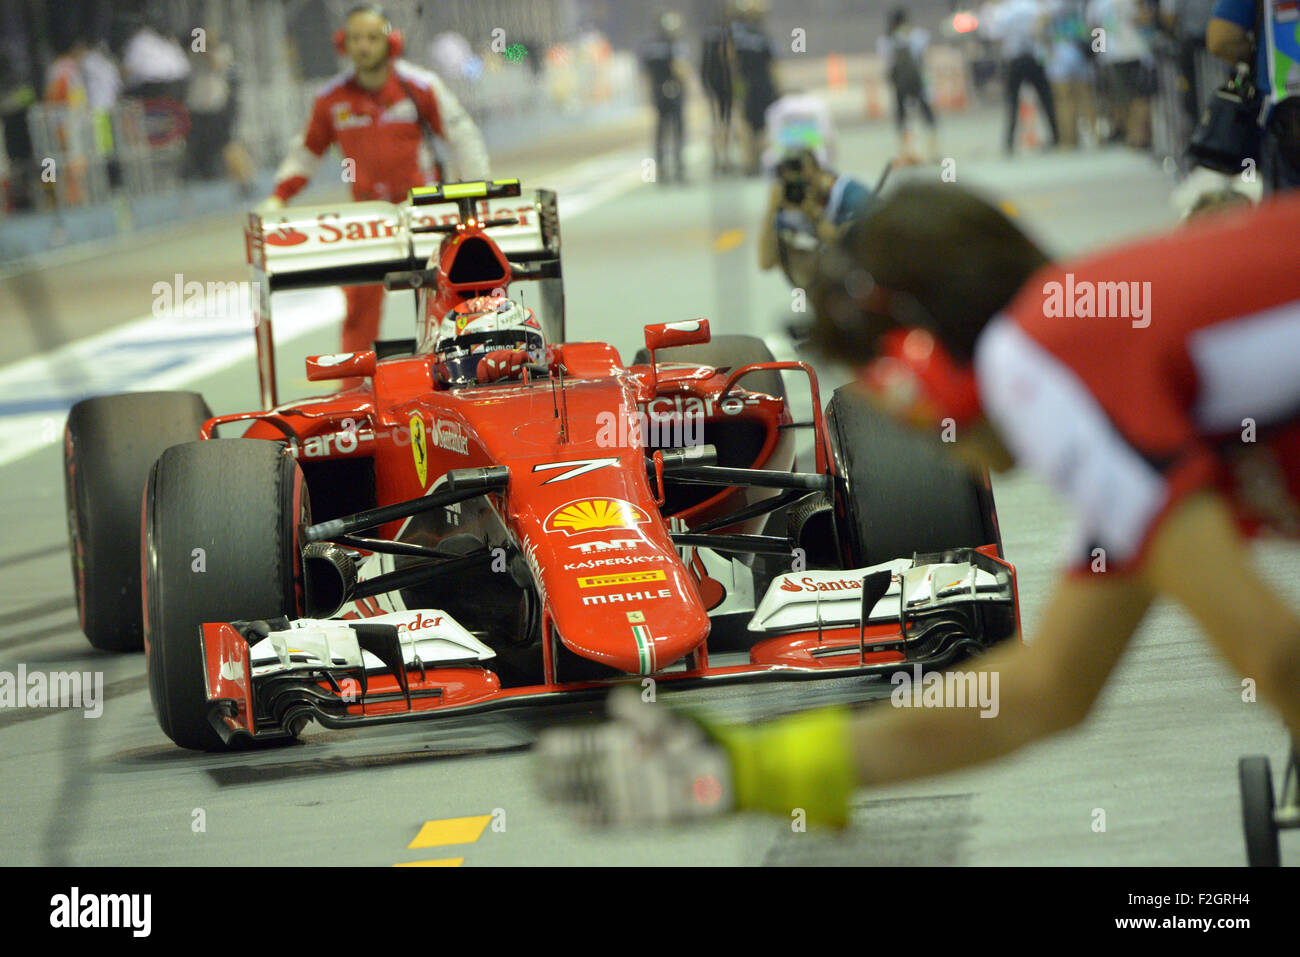 Singapore. 18th Sep, 2015. Team Ferrari driver Kimi Raikkonen drives in to the garage the second practice during F1 Singapore Grand Prix Night Race in Singapore's Marina Bay Street Circuit, Sept. 18, 2015. © Then Chih Wey/Xinhua/Alamy Live News Stock Photo